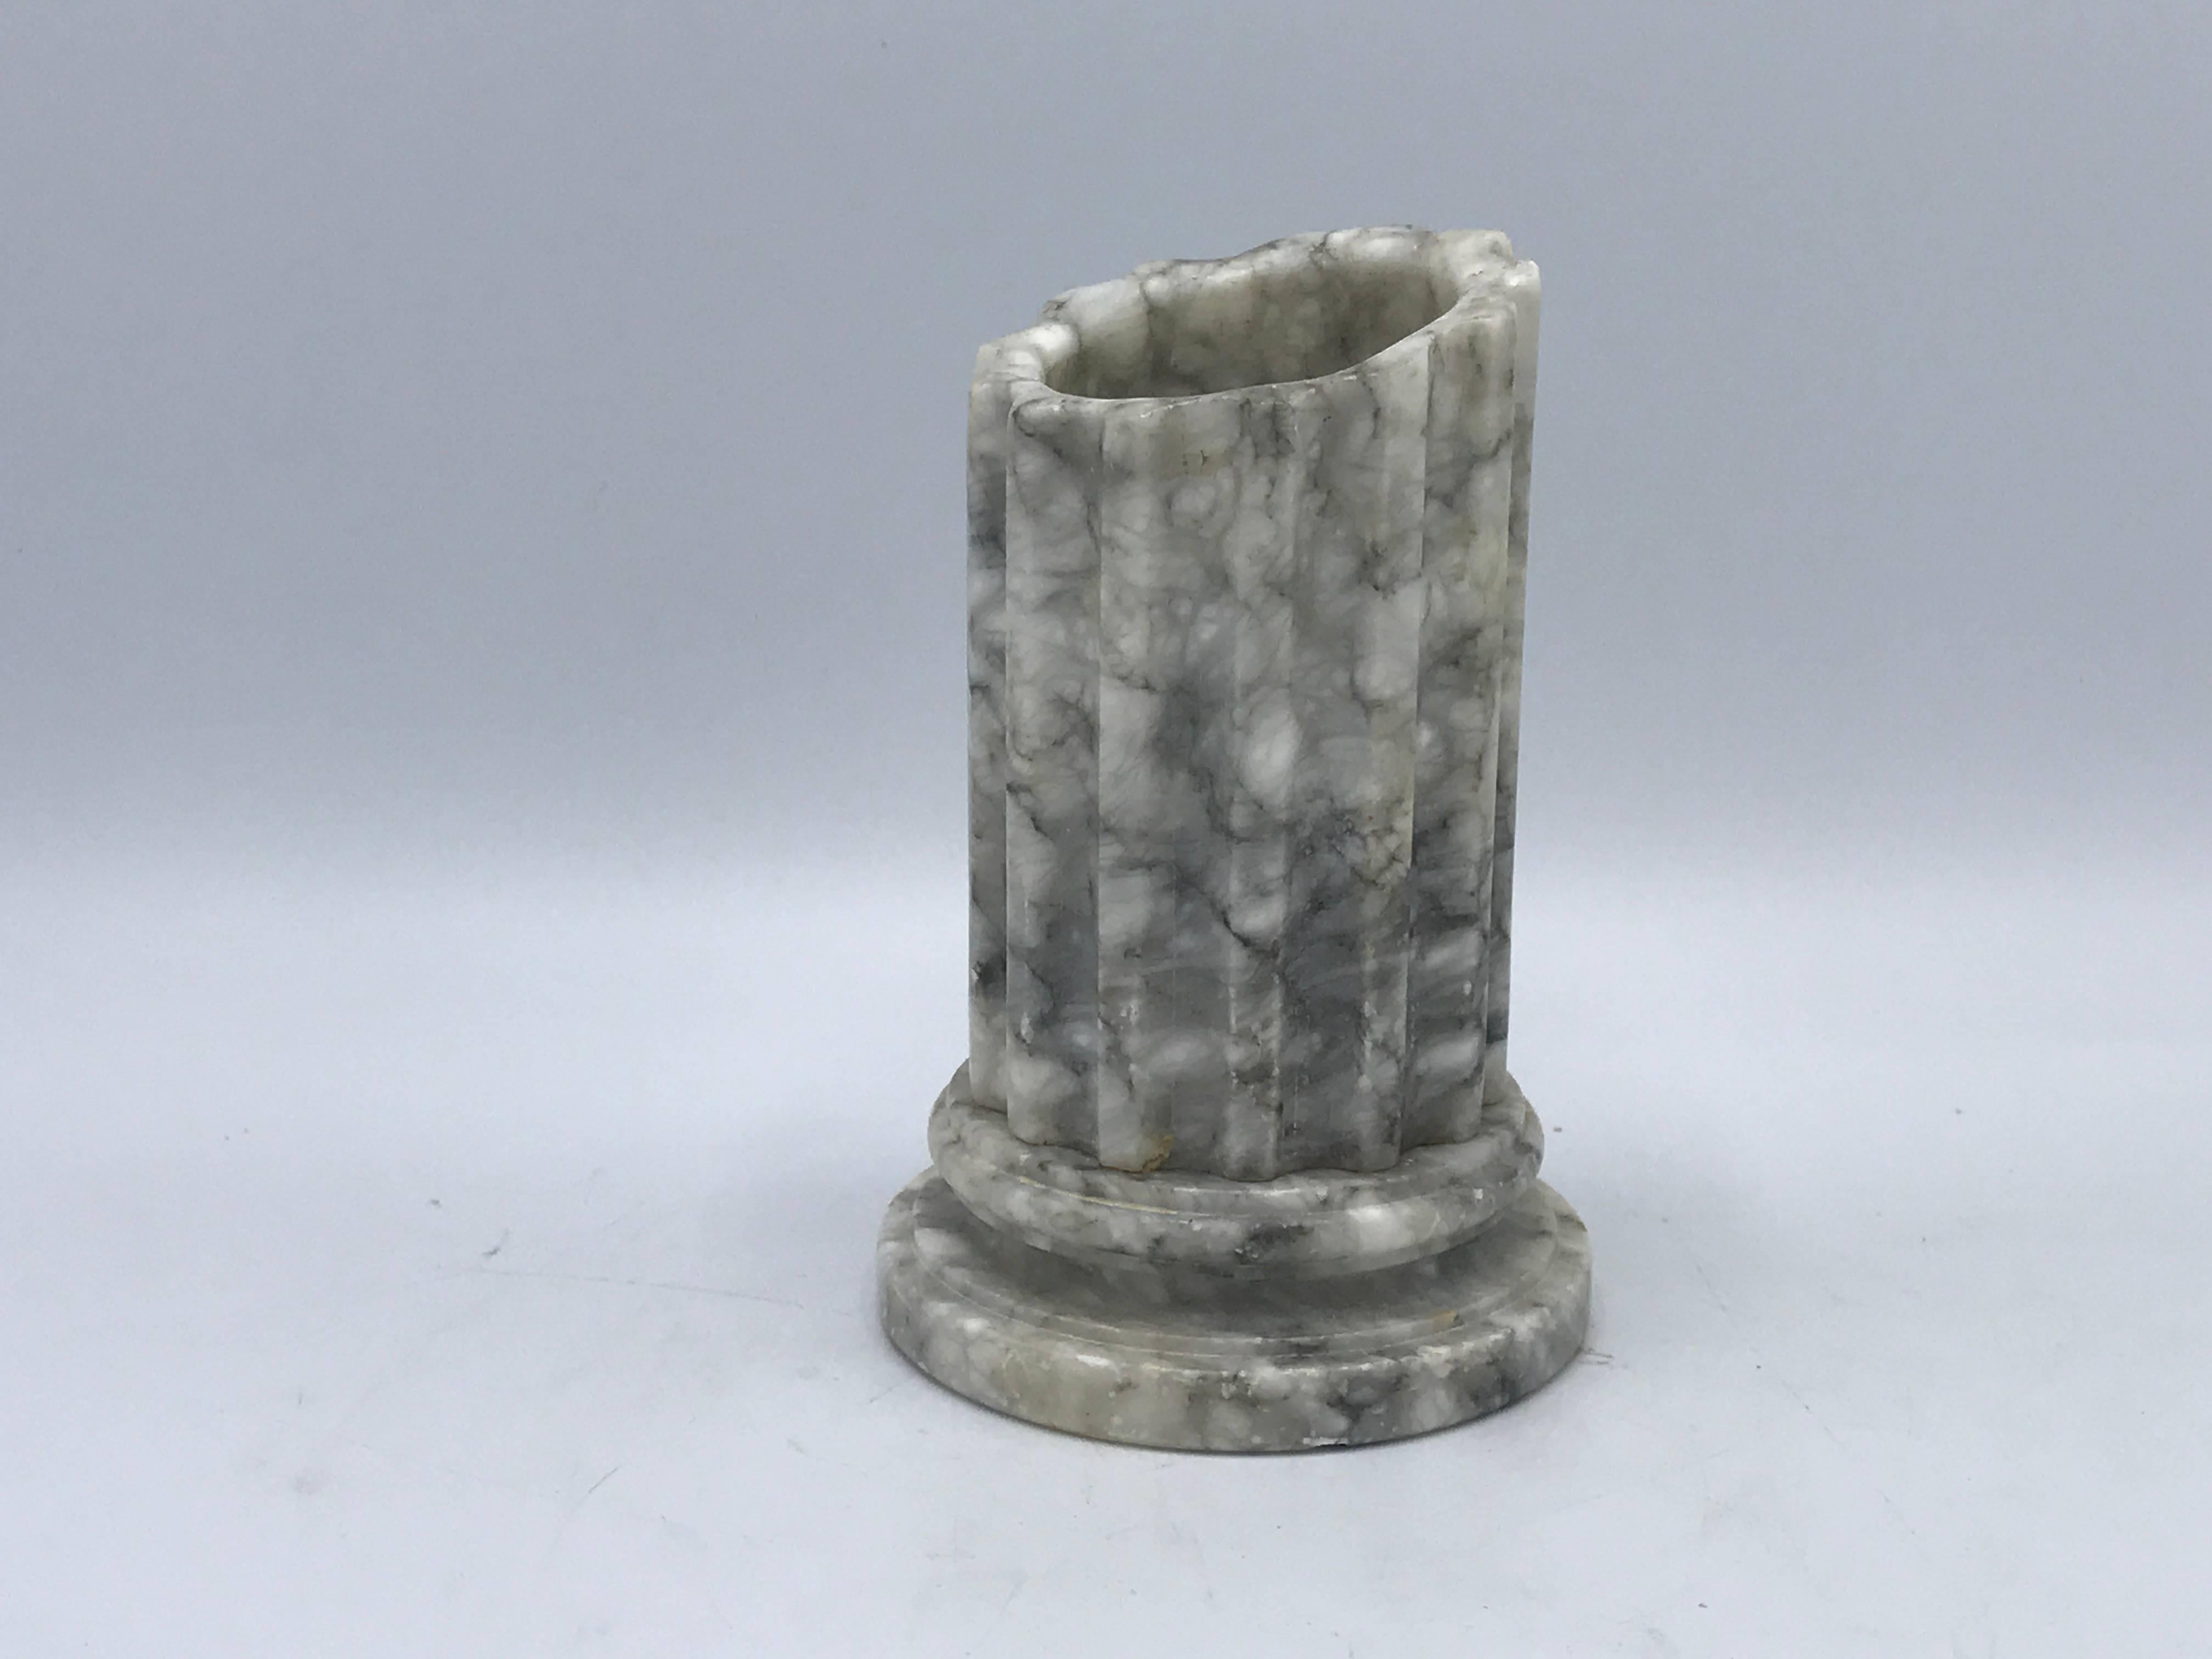 Offered is a gorgeous, 1940s Italian alabaster column vase or pen cup, sold exclusively by Bergdorf Goodman. Original tag is on the underside.